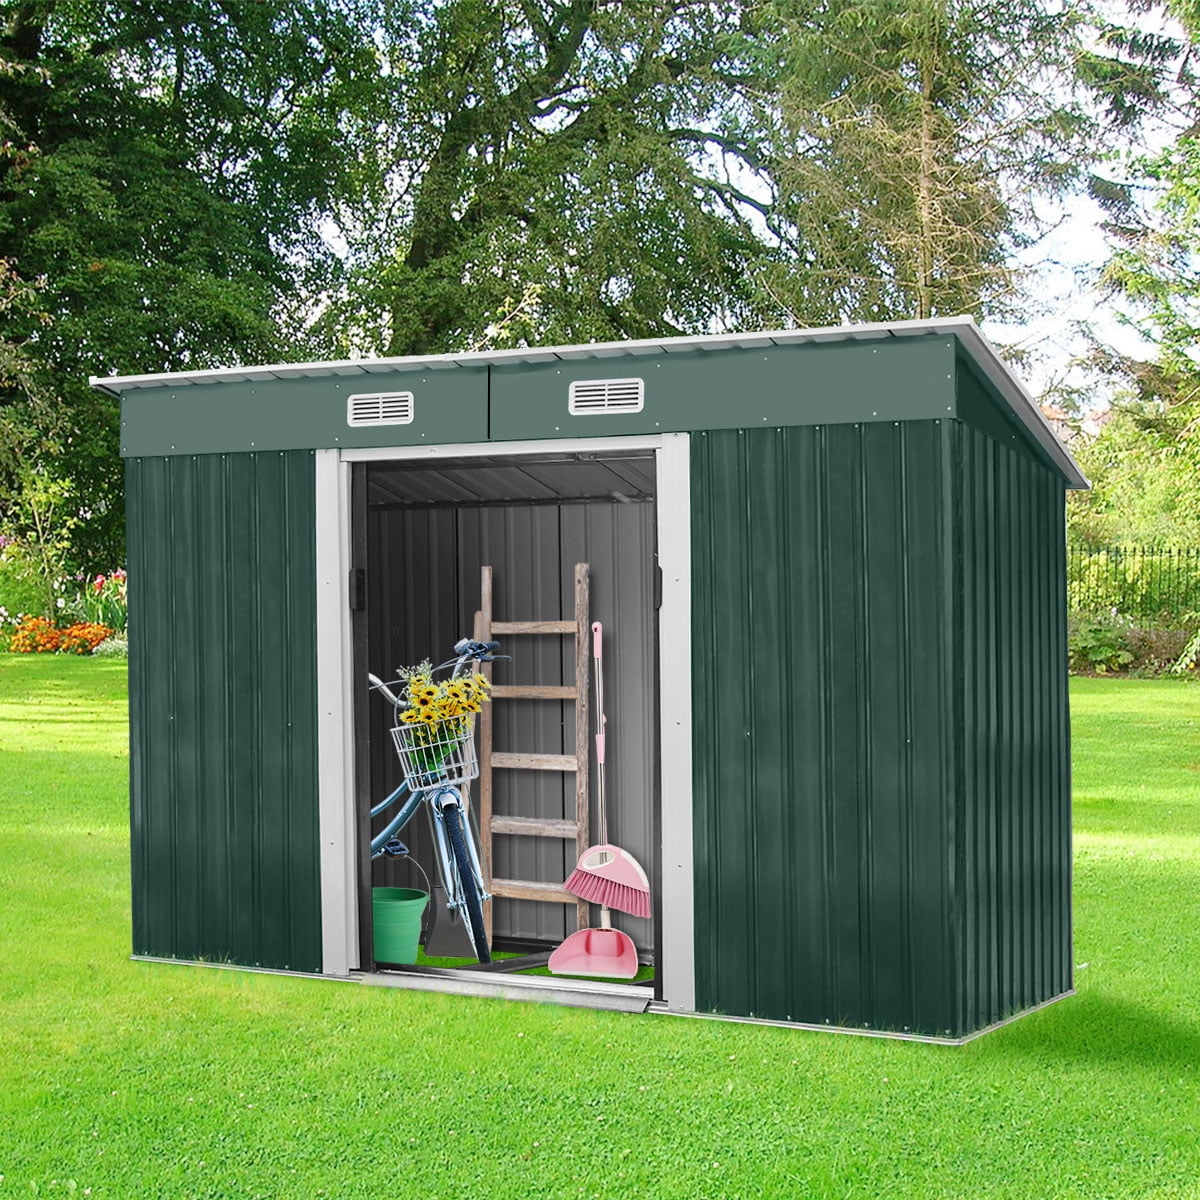 Jaxpety 9' x 4' Large Outdoor Steel Storage Shed with 